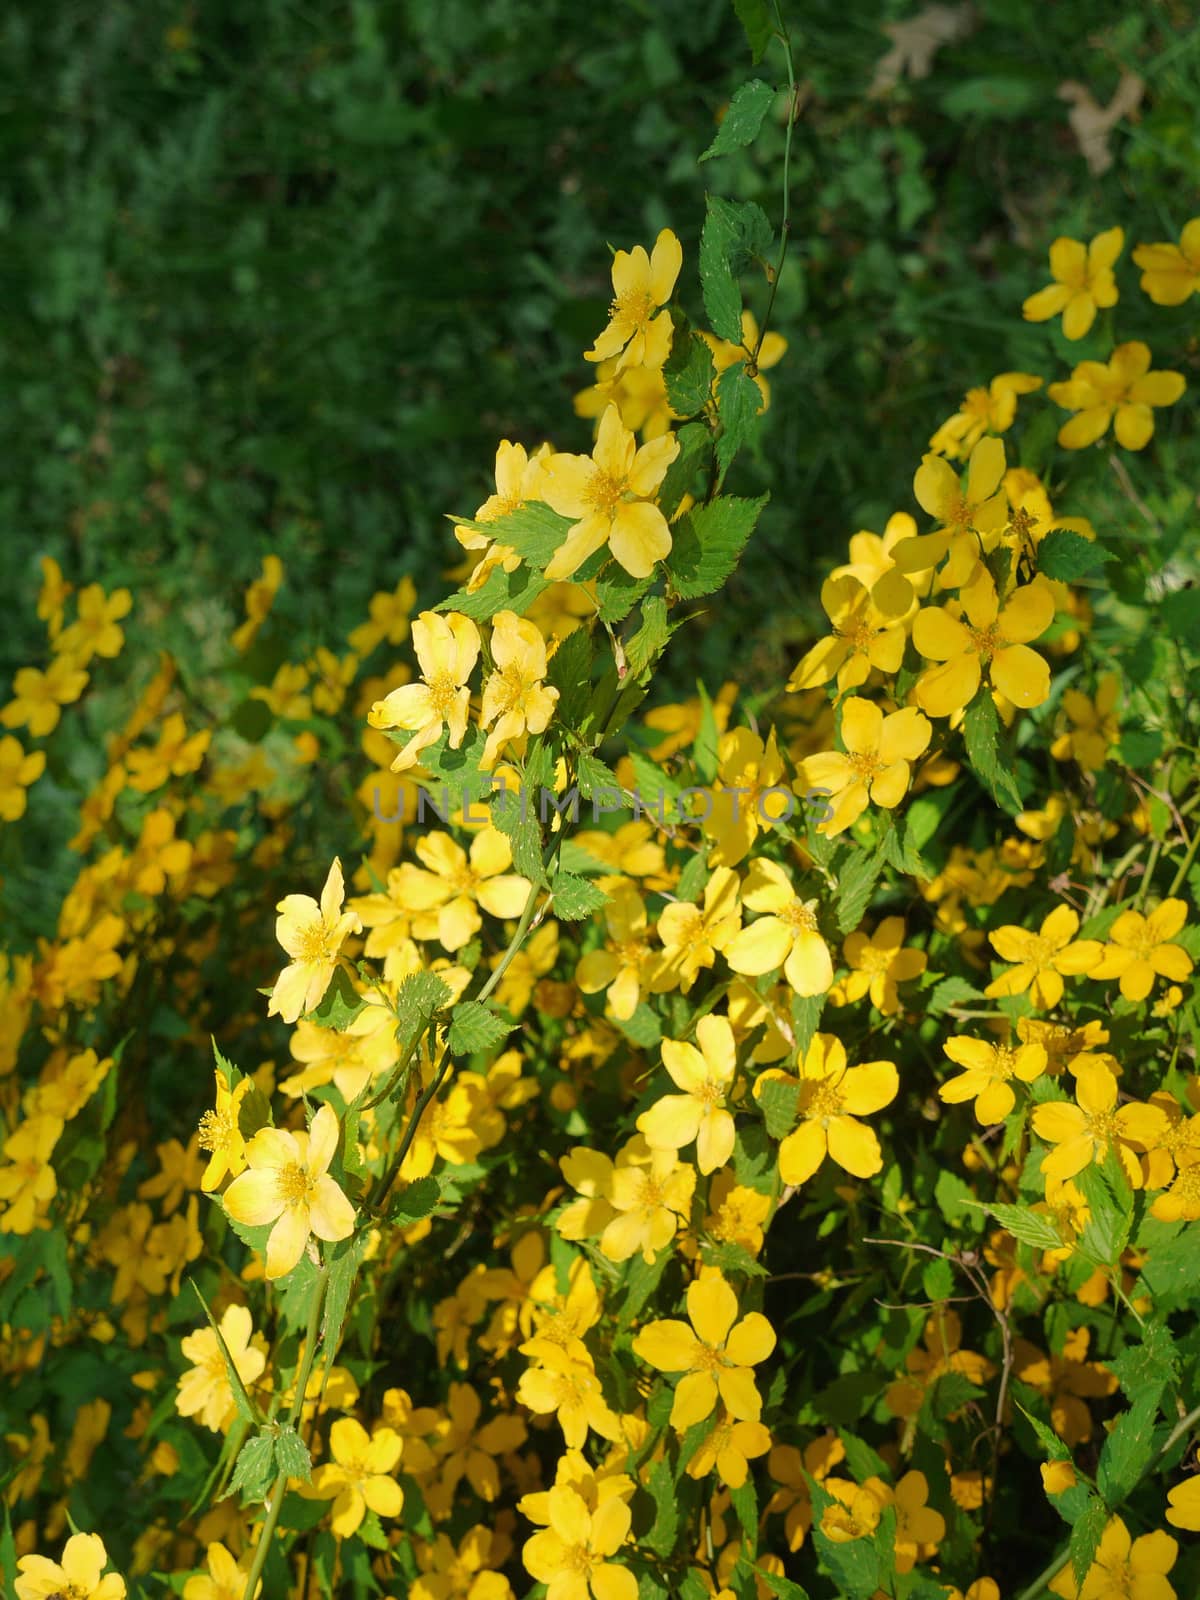 Little yellow hypericum flower with green leaves under the scorching sun